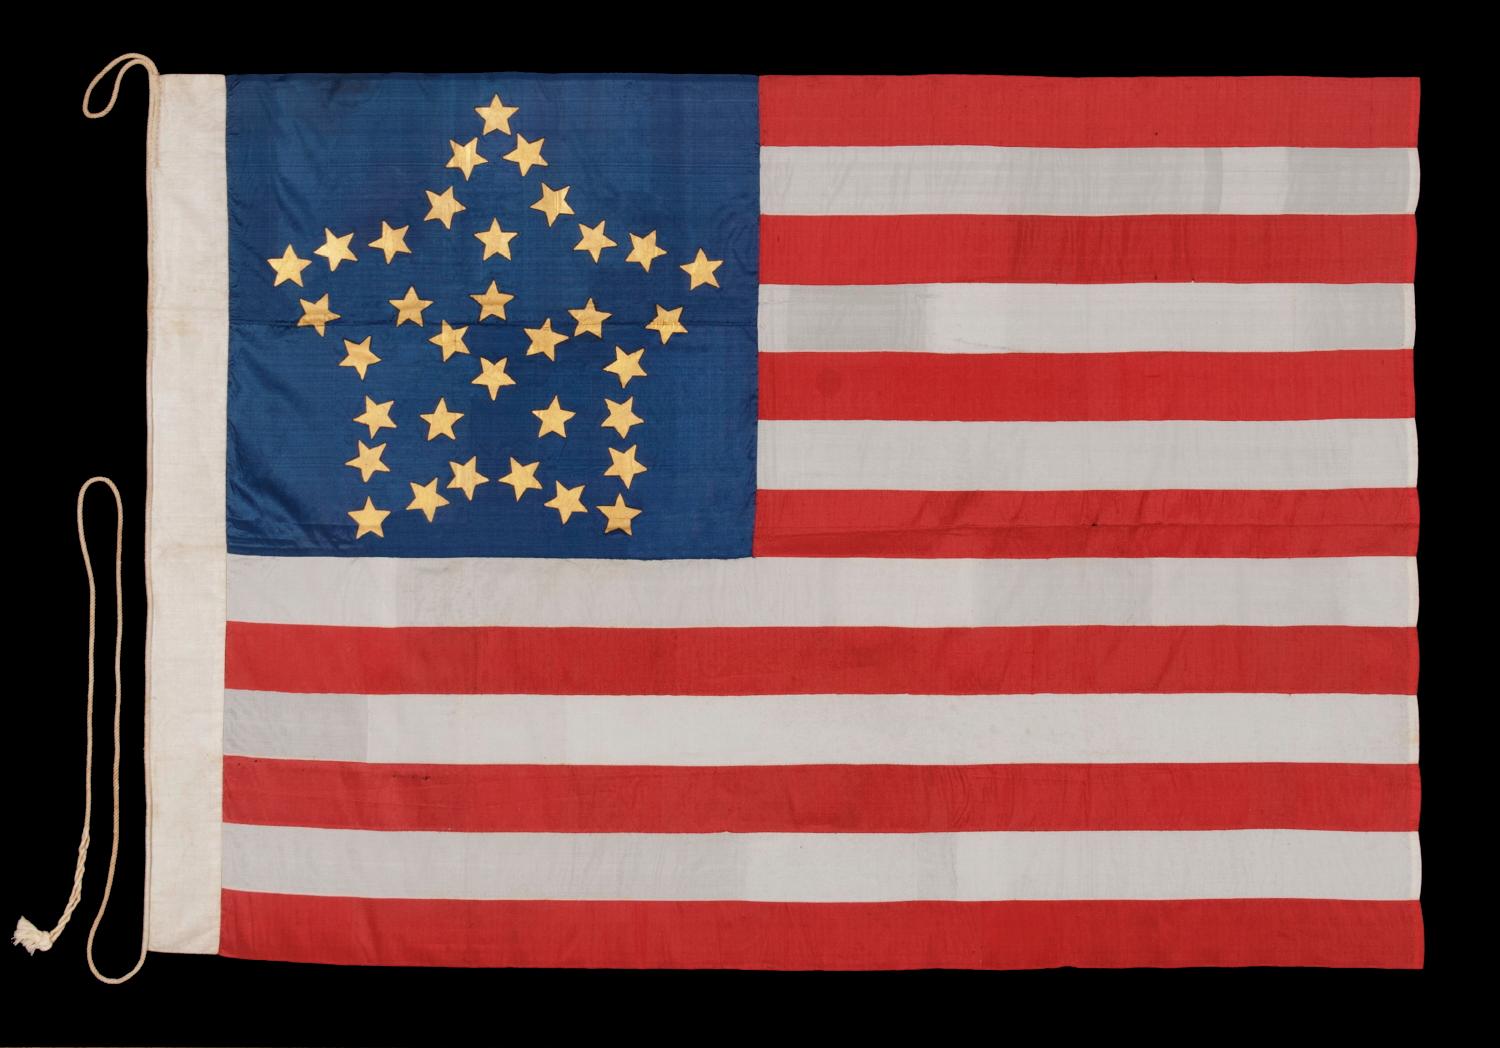 34 GILT PAINTED STARS IN A BOLD REPRESENTATION OF THE “GREAT STAR” PATTERN, ON A SILK, ANTIQUE AMERICAN FLAG MADE DURING THE OPENING YEARS OF THE CIVIL WAR, 1861-63, PROBABLY MADE UNDER MILITARY CONTRACT OR FOR USE BY LOCAL MILITIA, ENTIRELY